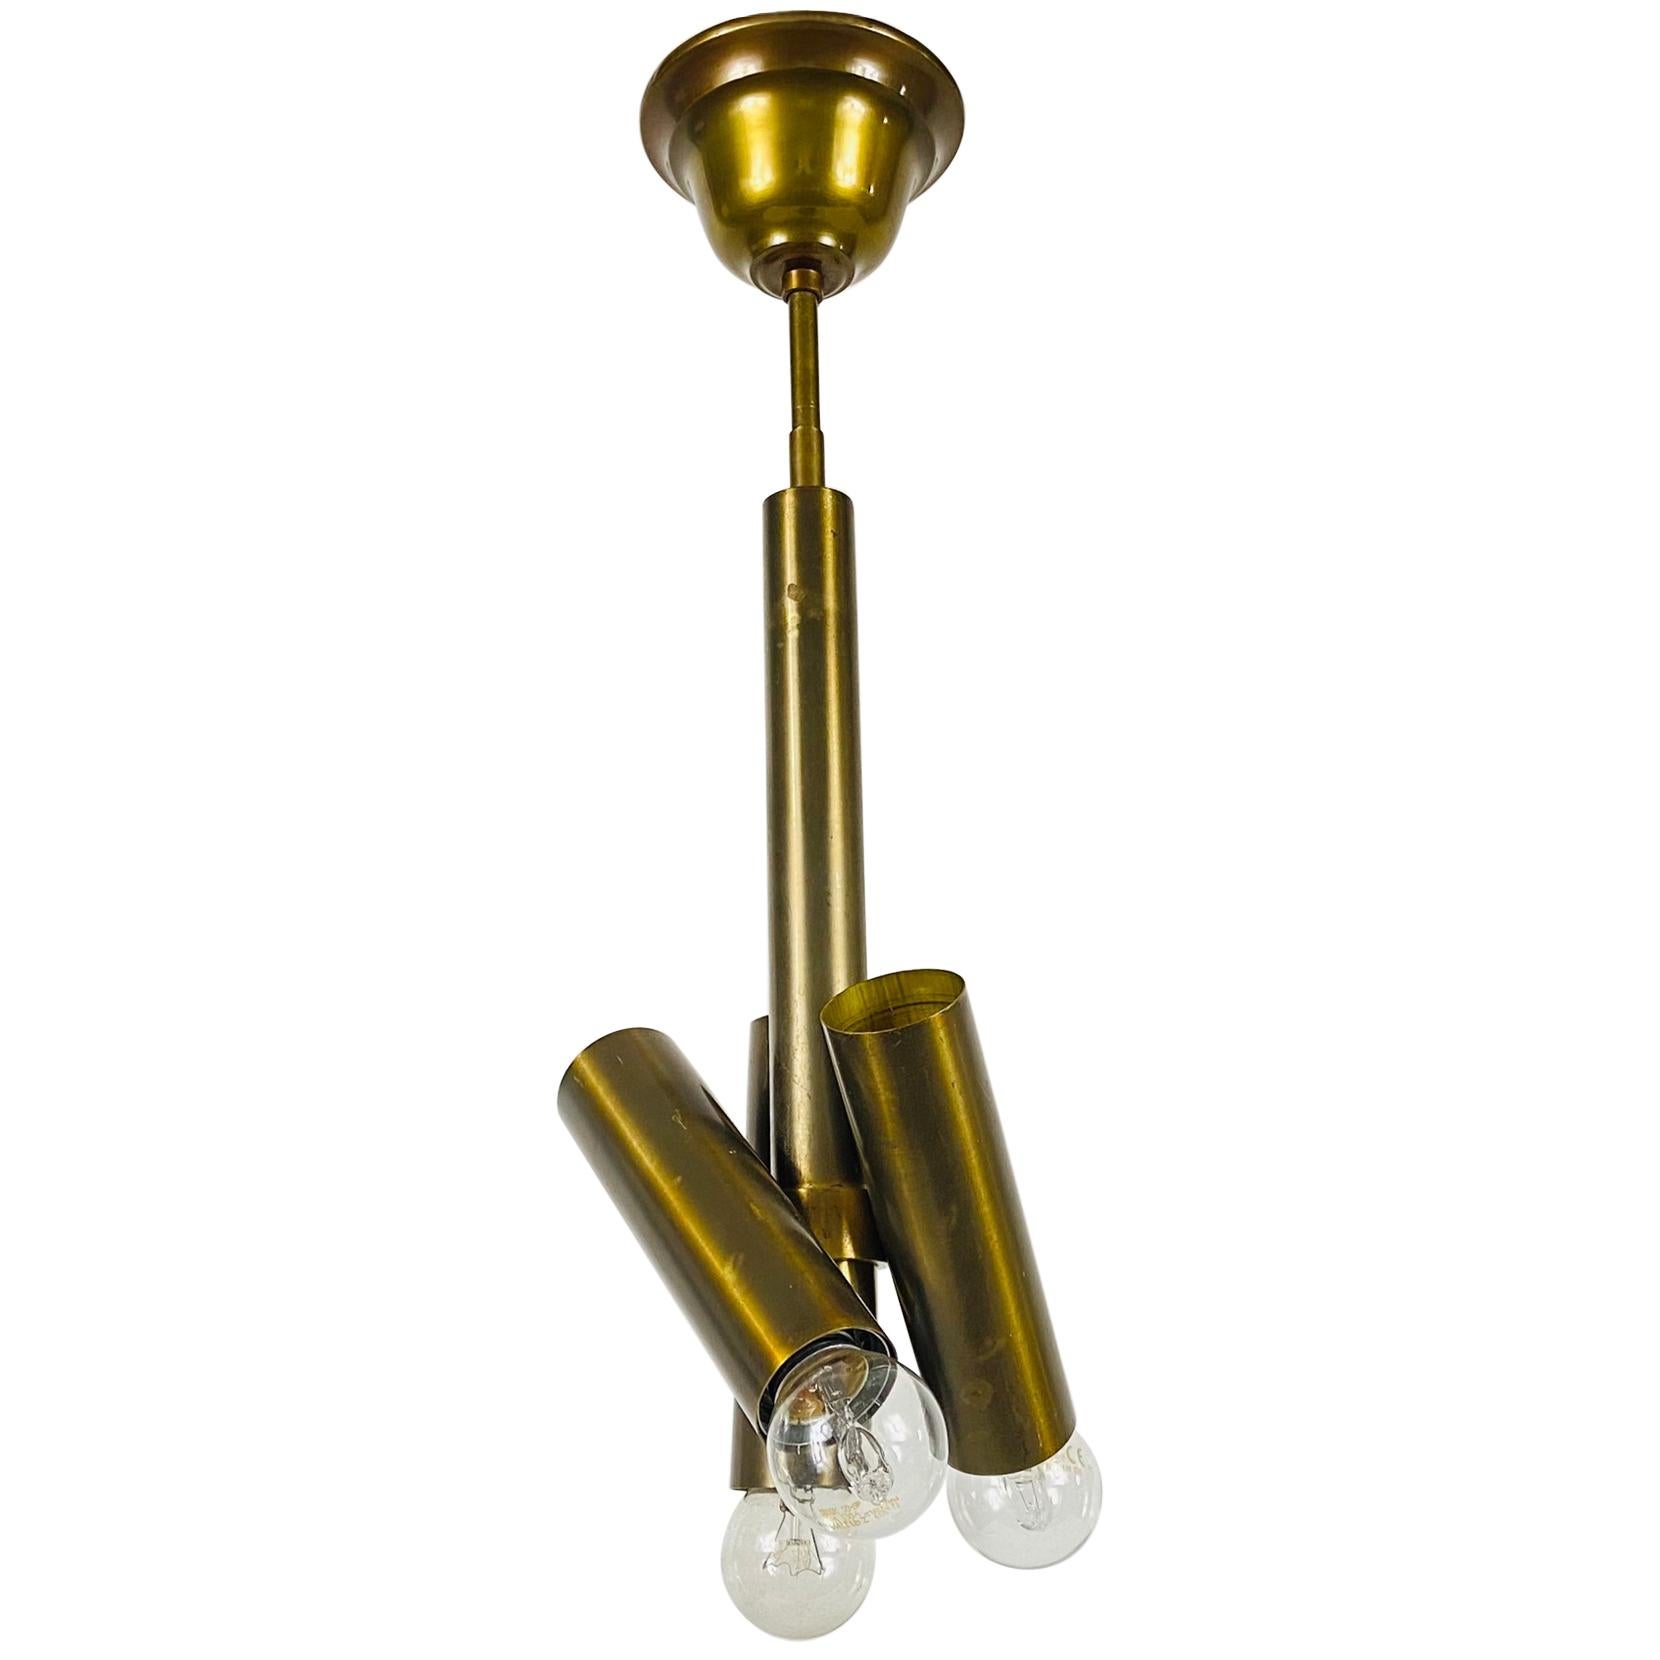 Italian Midcentury Brass 3-Arm Chandelier in the style of Stilnovo, Italy, 1950s For Sale